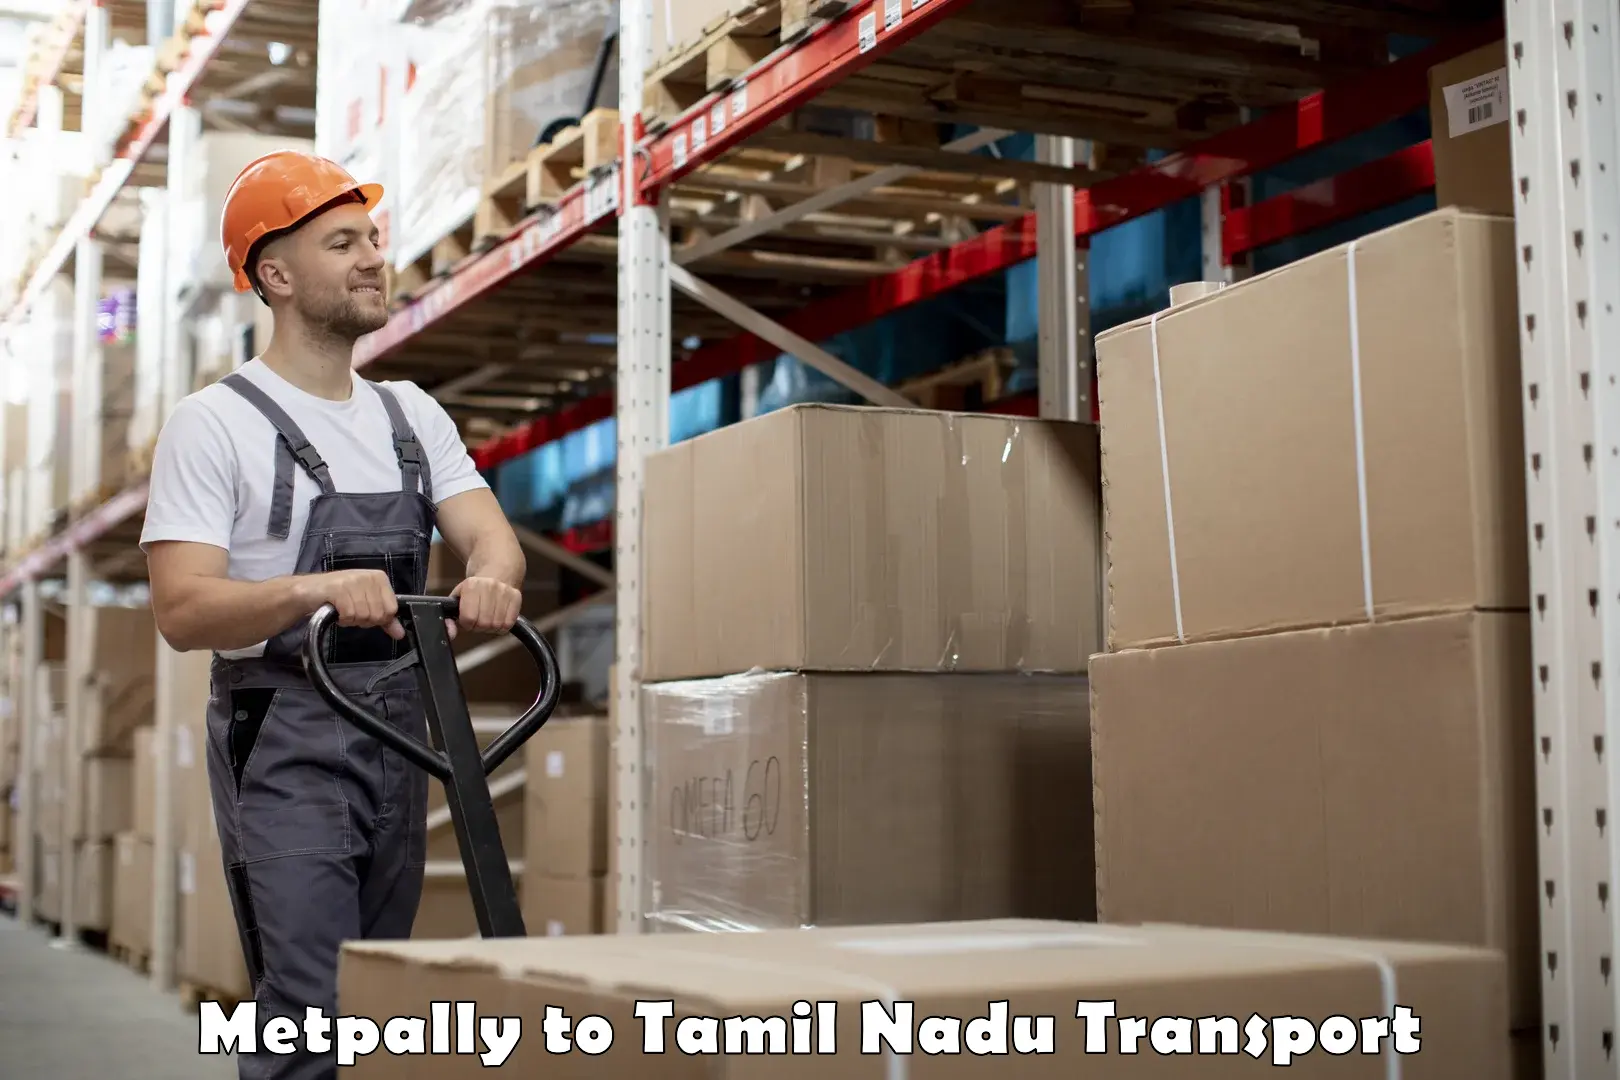 Daily parcel service transport Metpally to Ulundurpet